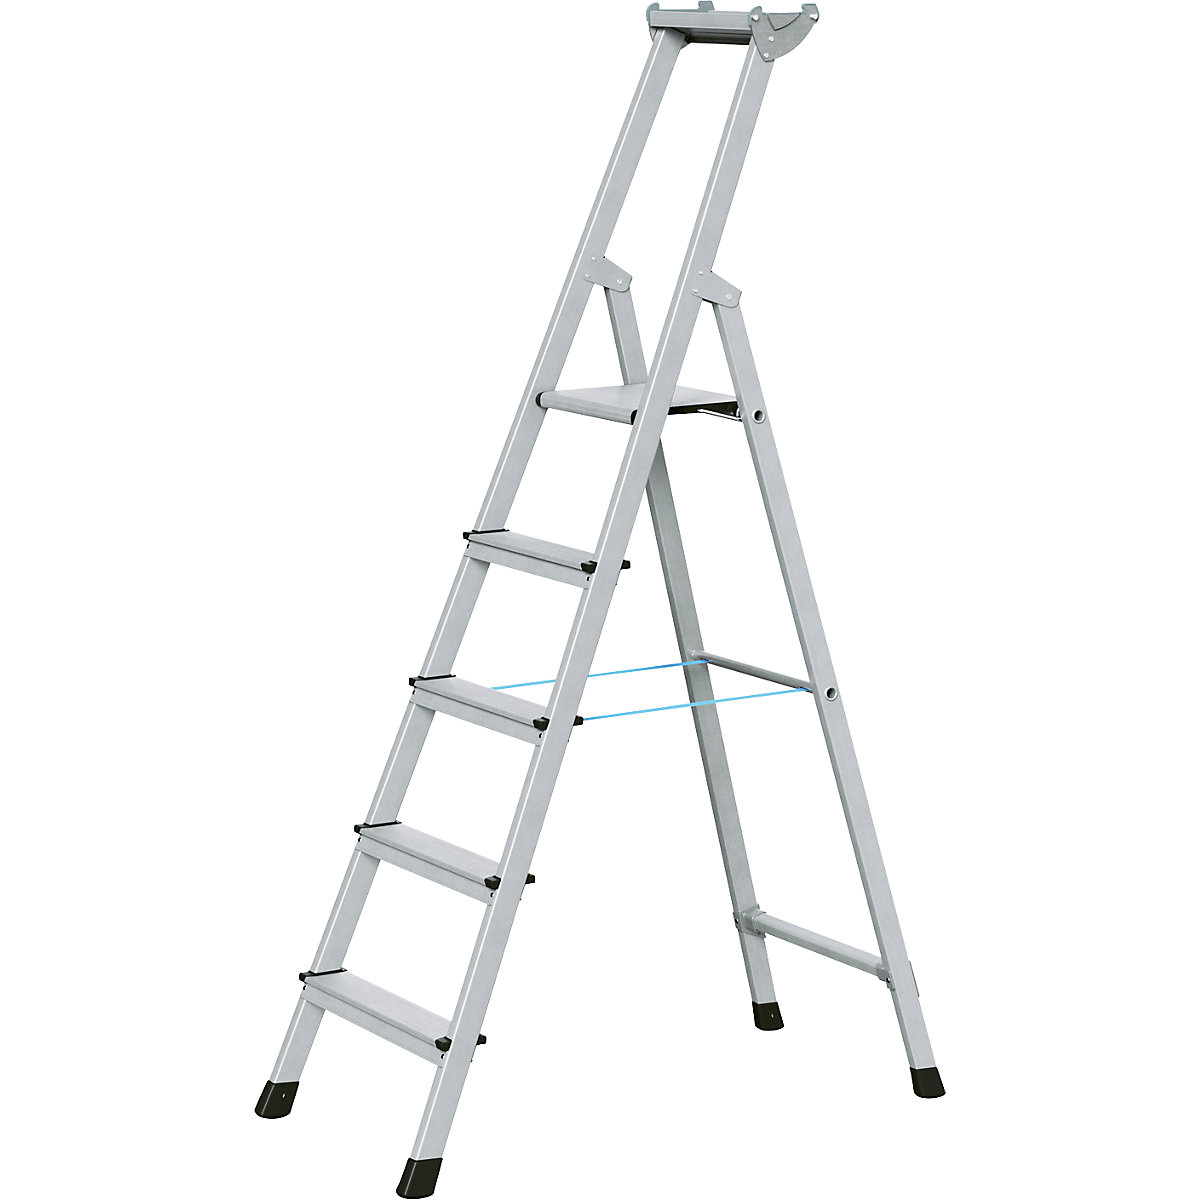 Professional step ladder, single sided access – ZARGES, anodised aluminium, with tool tray, for workshop and industrial use, 5 steps inclusive platforms-8